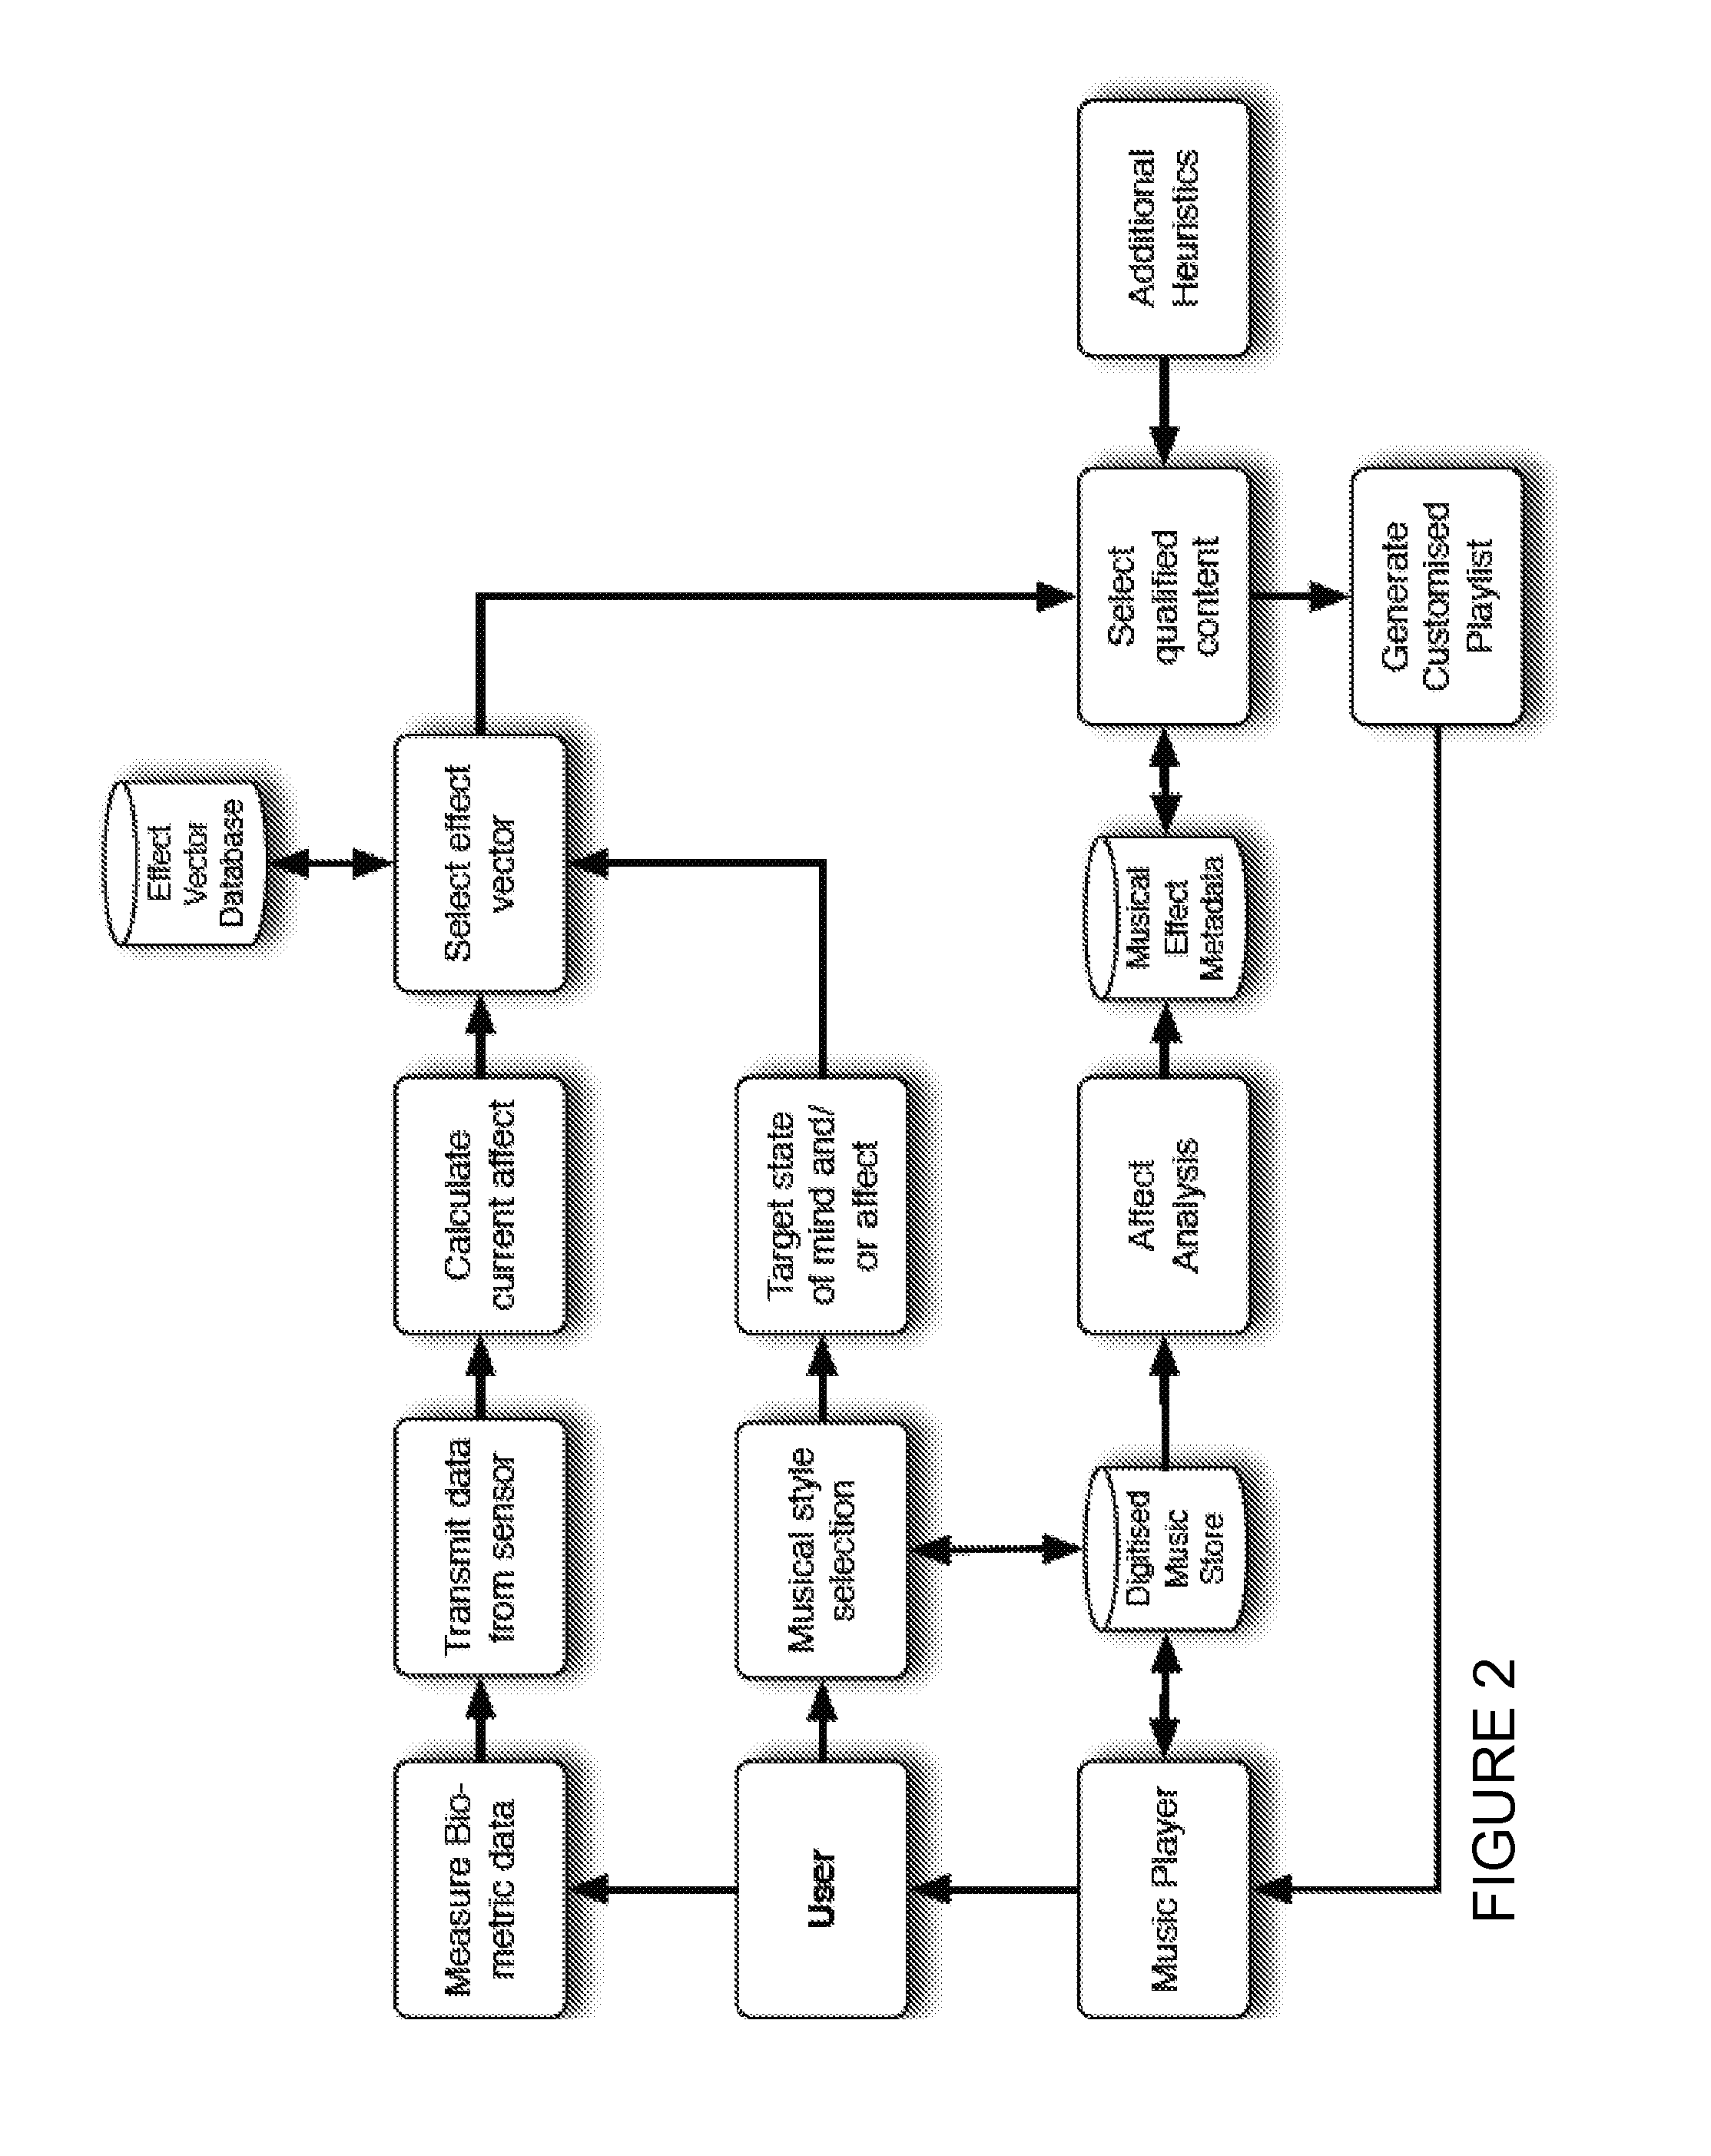 Method and system for analysing sound